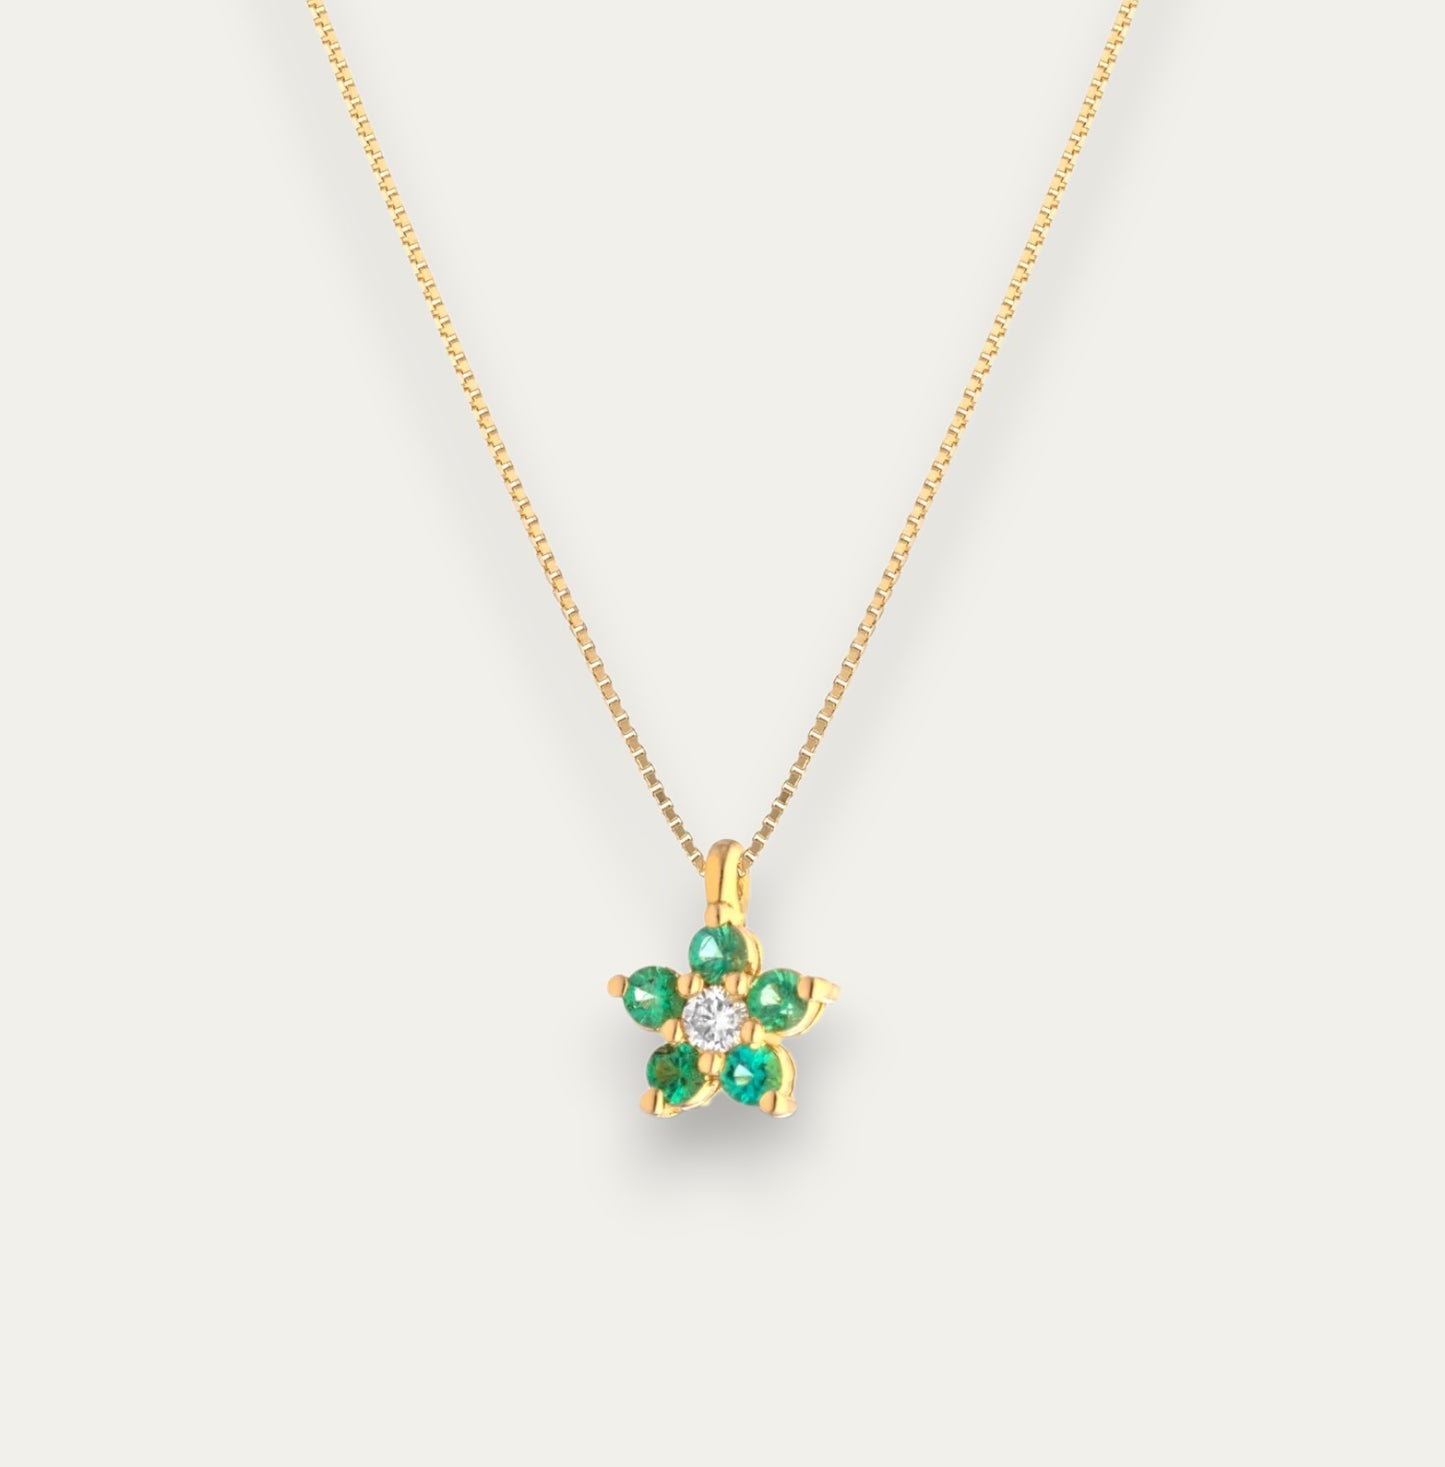 Emerald and Diamond - 18k Gold Necklace